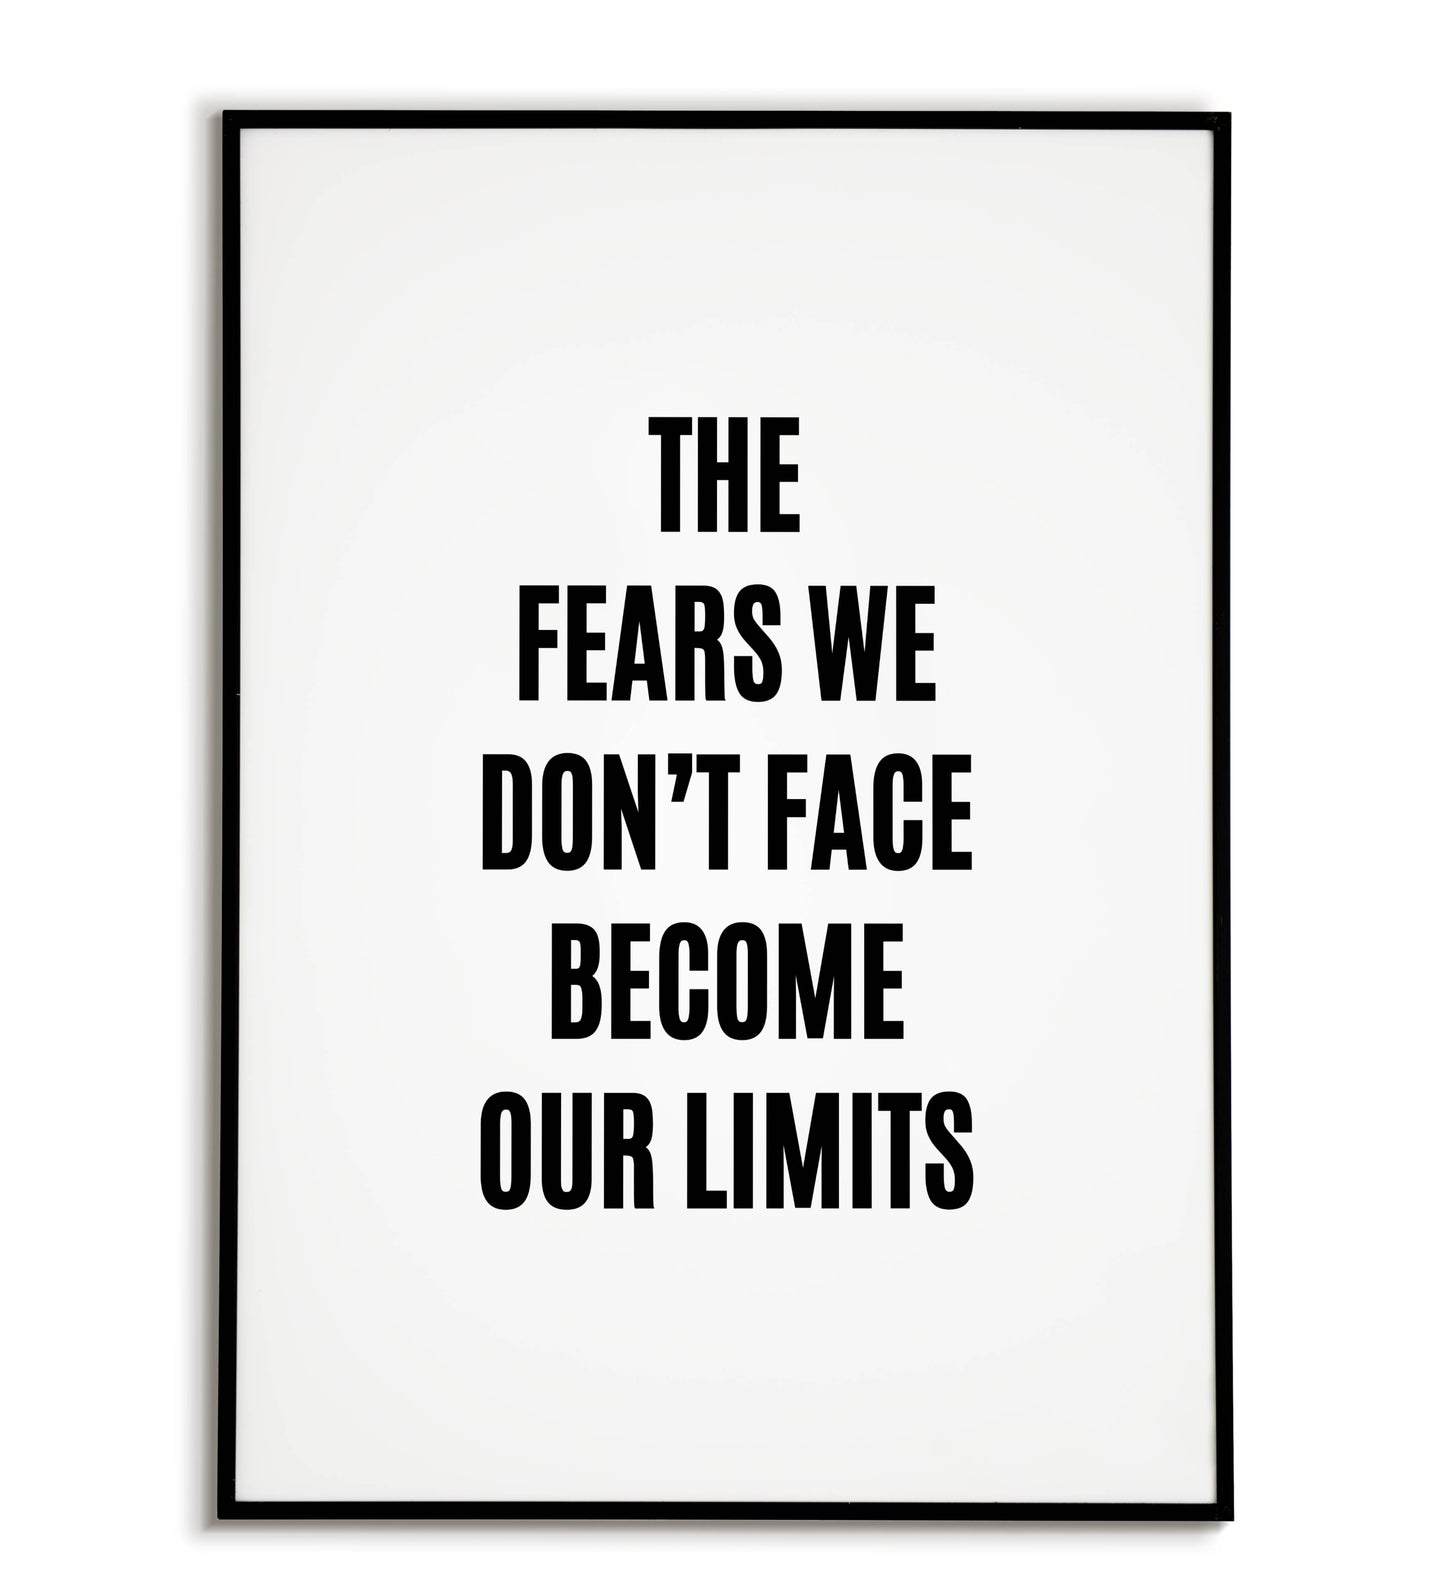 The fears we don't face become our limits" typographic motivational poster.